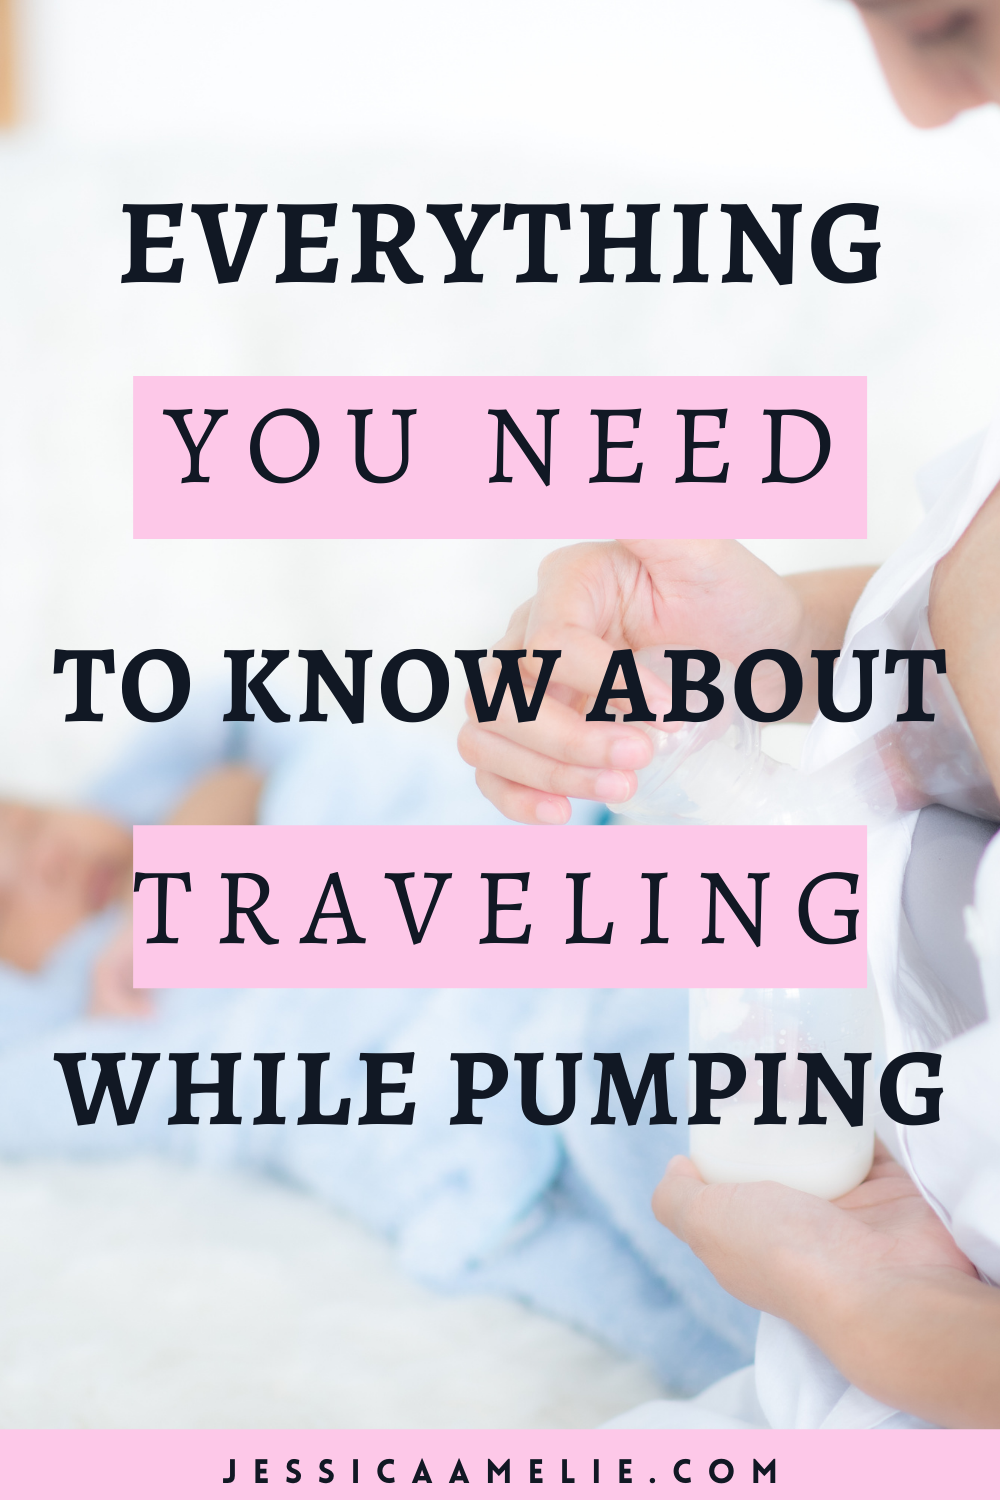 Everything You Need to Know About Traveling While Pumping